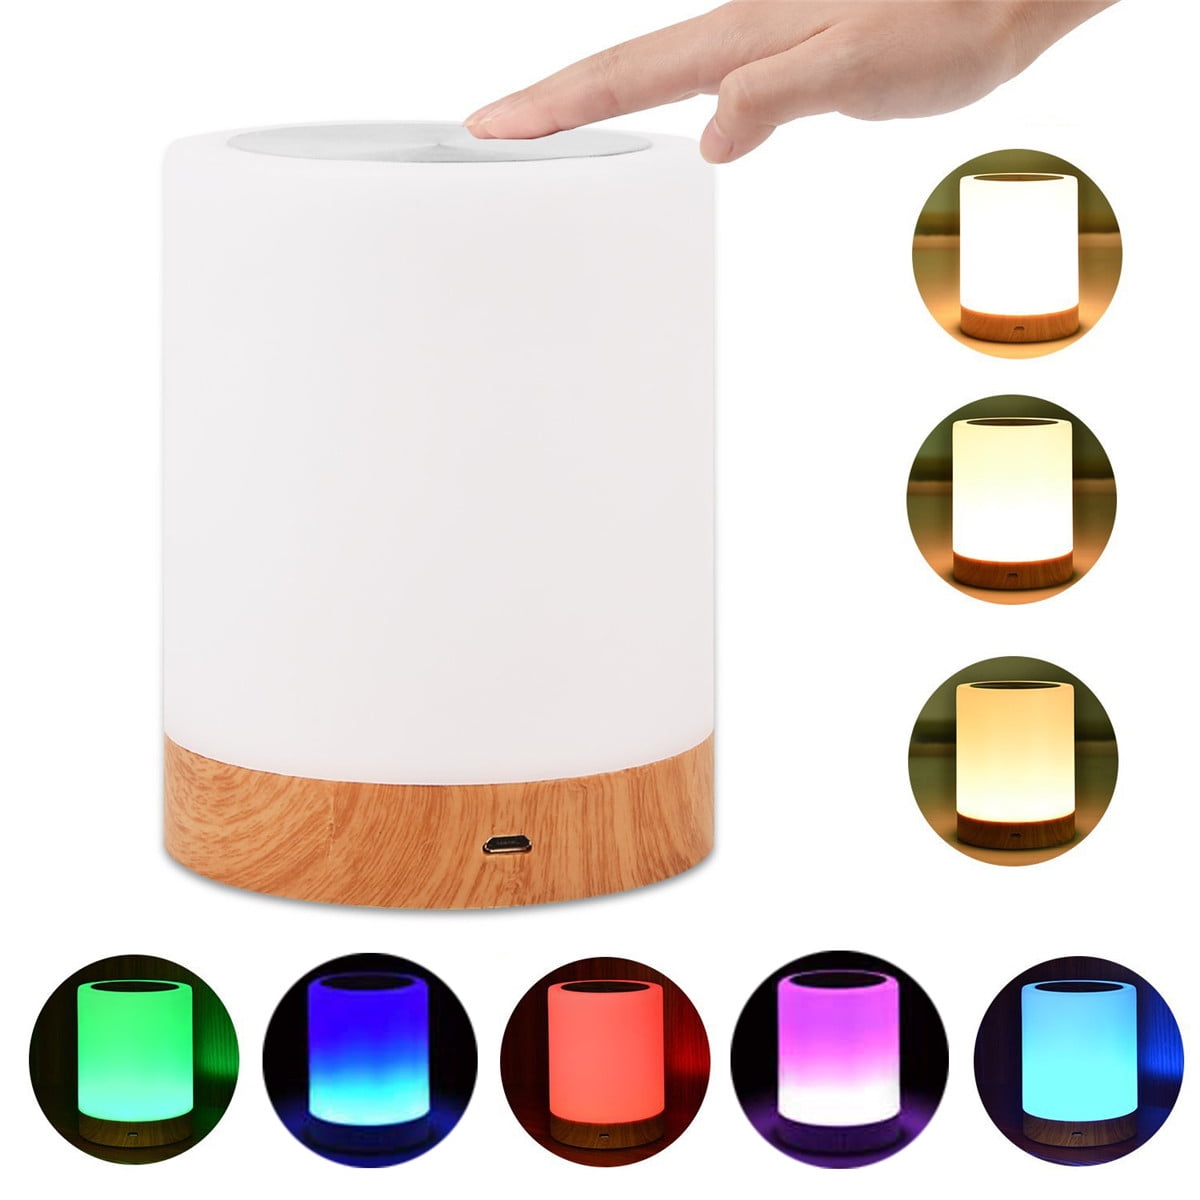 Night Light Kid LED Bedside Lamp Touch Control Dimmable Light 7 RGB Color Changing Multifunctional Table Lamp 1 Hour Timer Memory Function Nursery Night Light for Breastfeeding Sleep Aid Warm Light 